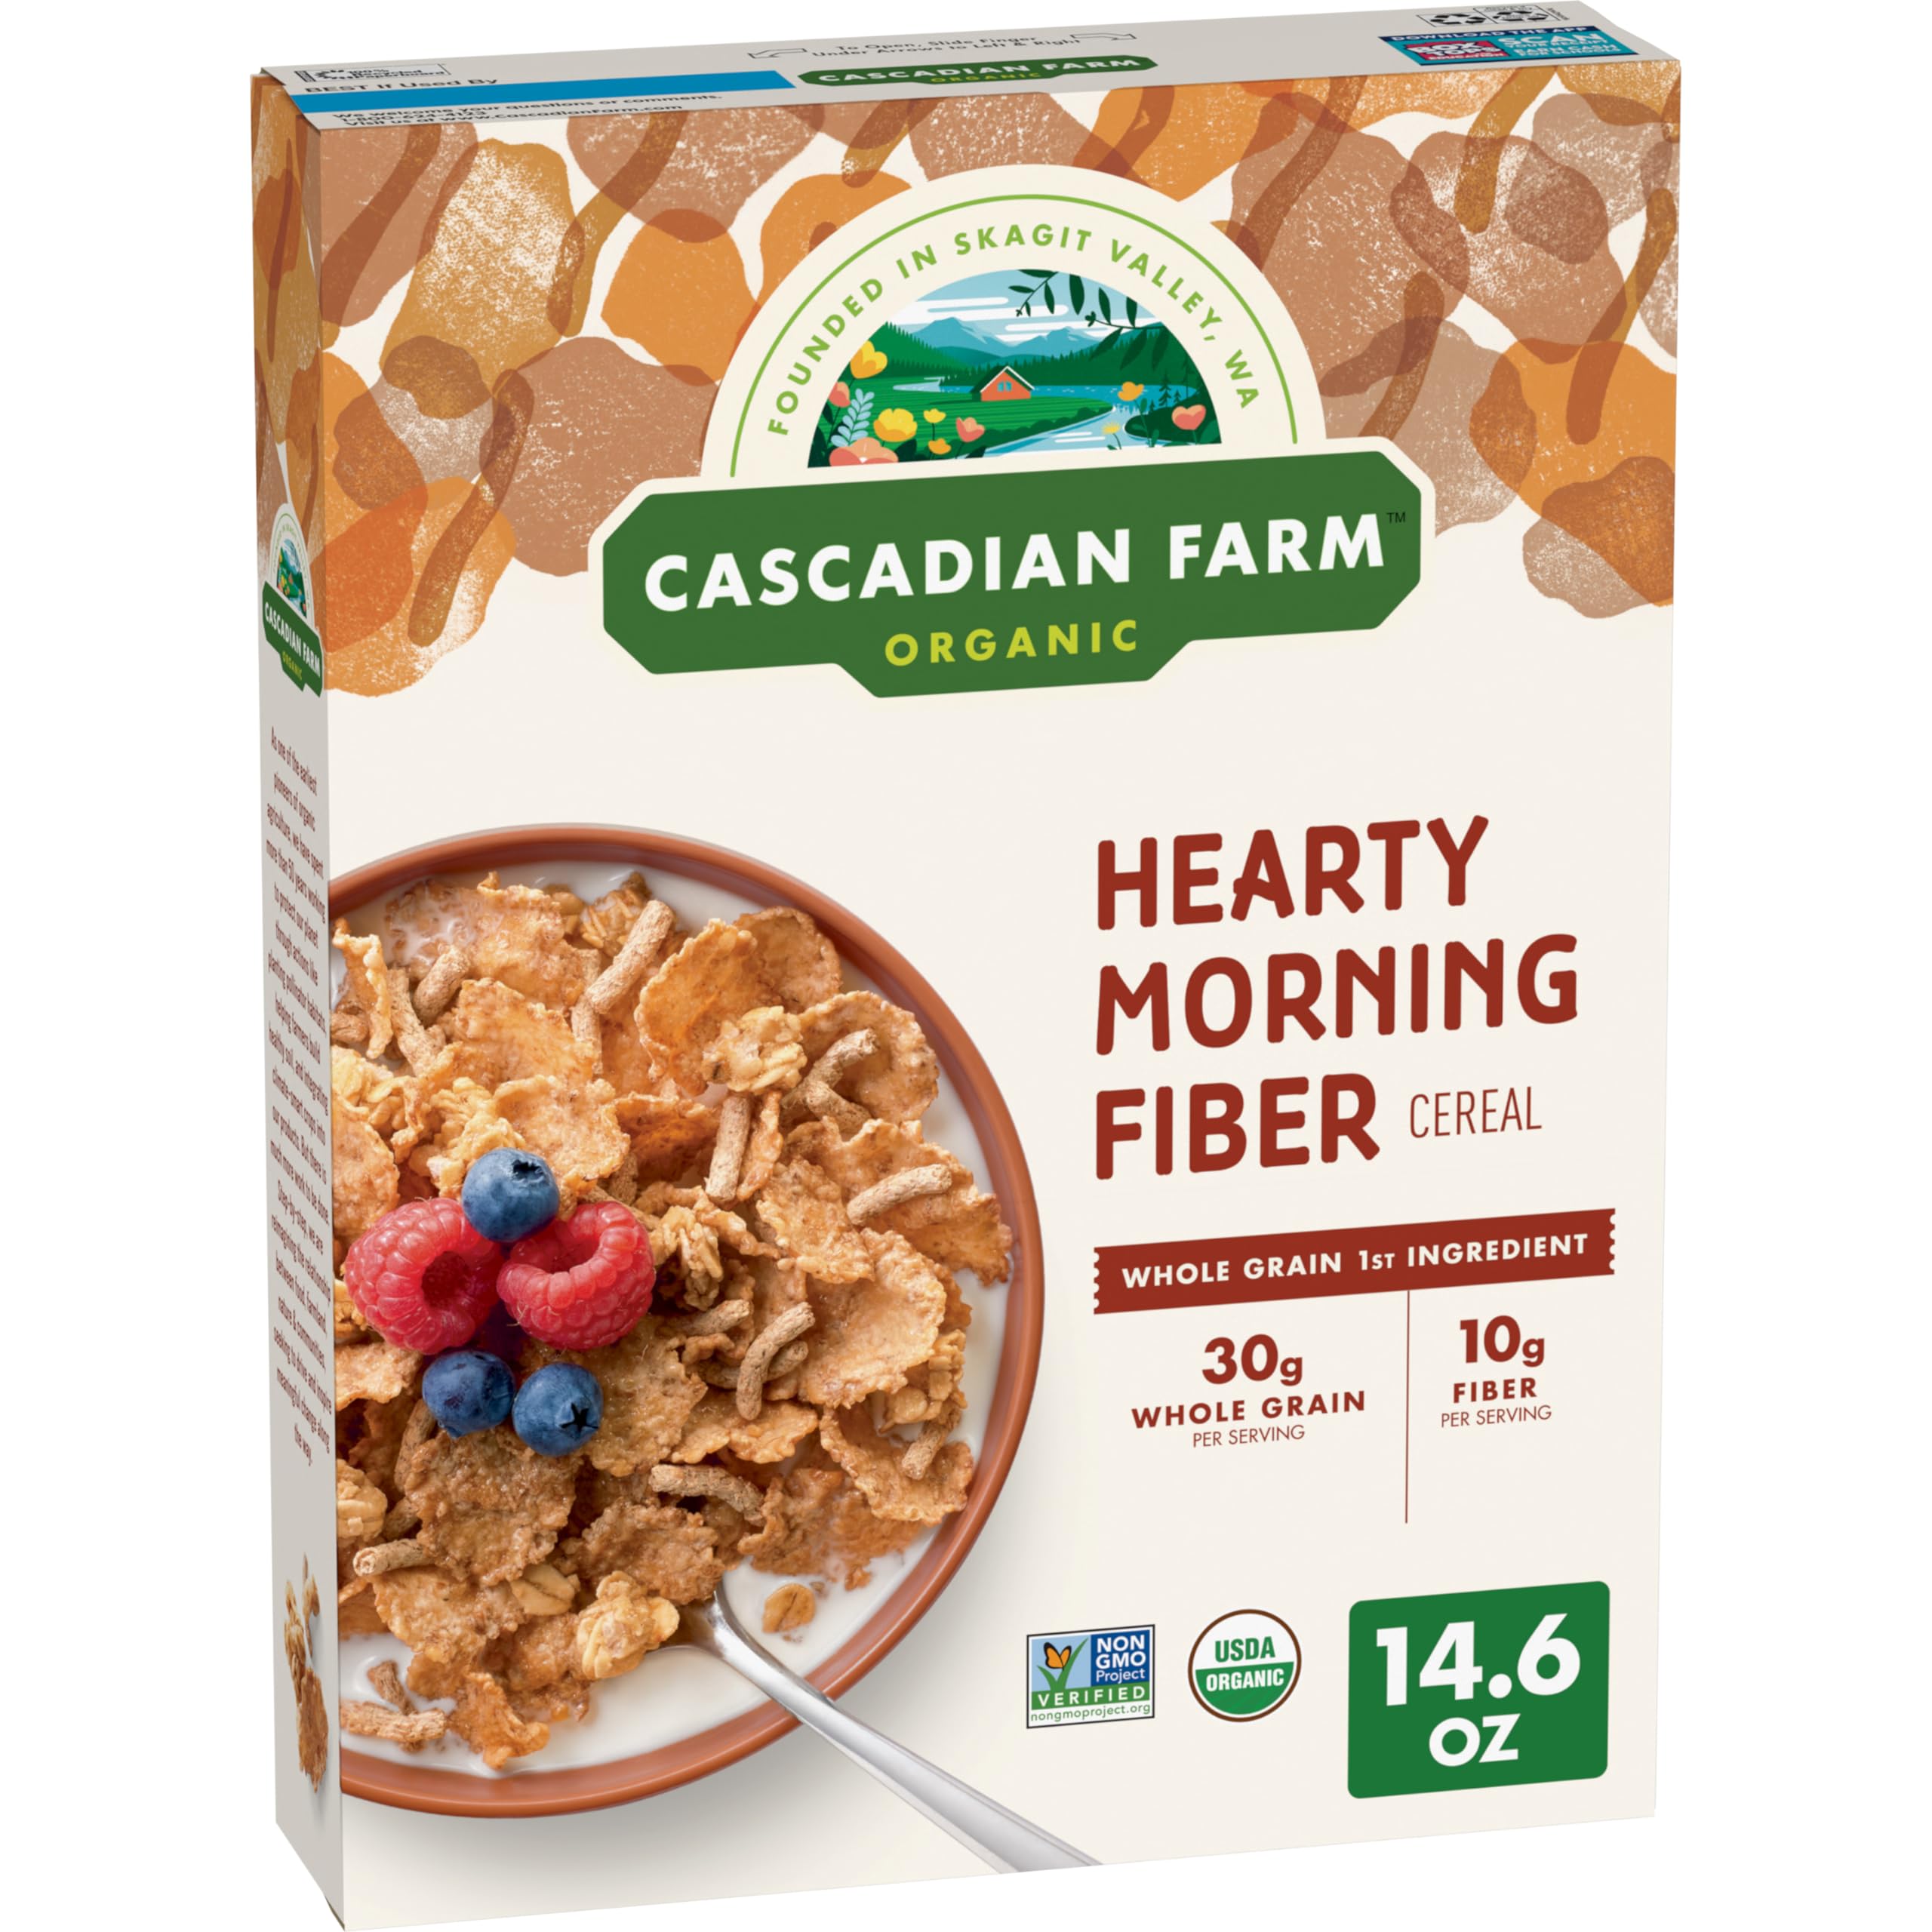 14.6-Oz Cascadian Farm Organic Hearty Morning Fiber Cereal $2.99 w/ S S Free Shipping w/ Prime or on $35